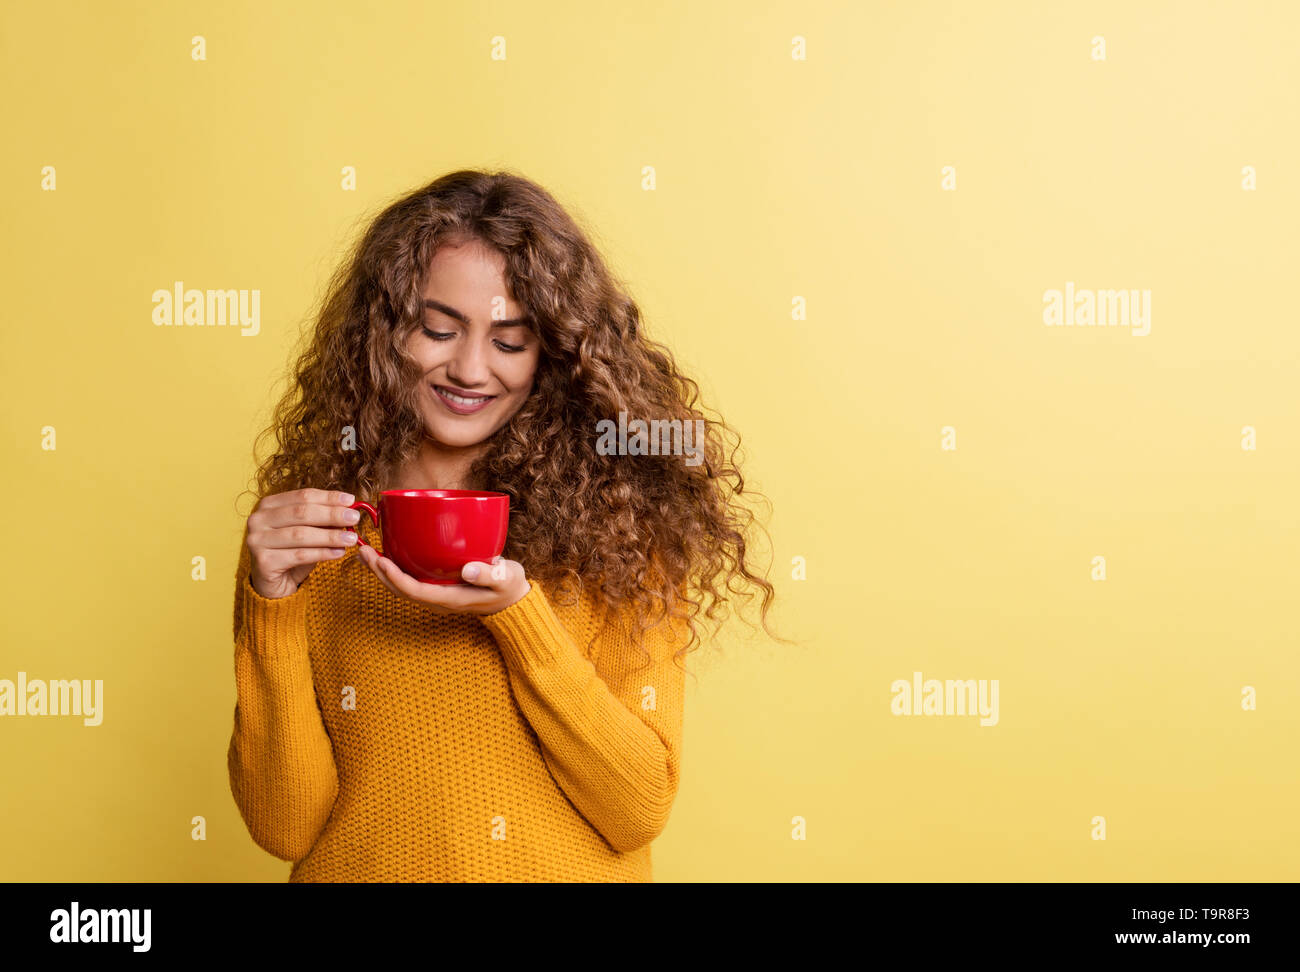 Portrait of a young woman with red cup in a studio on a yellow background. Stock Photo